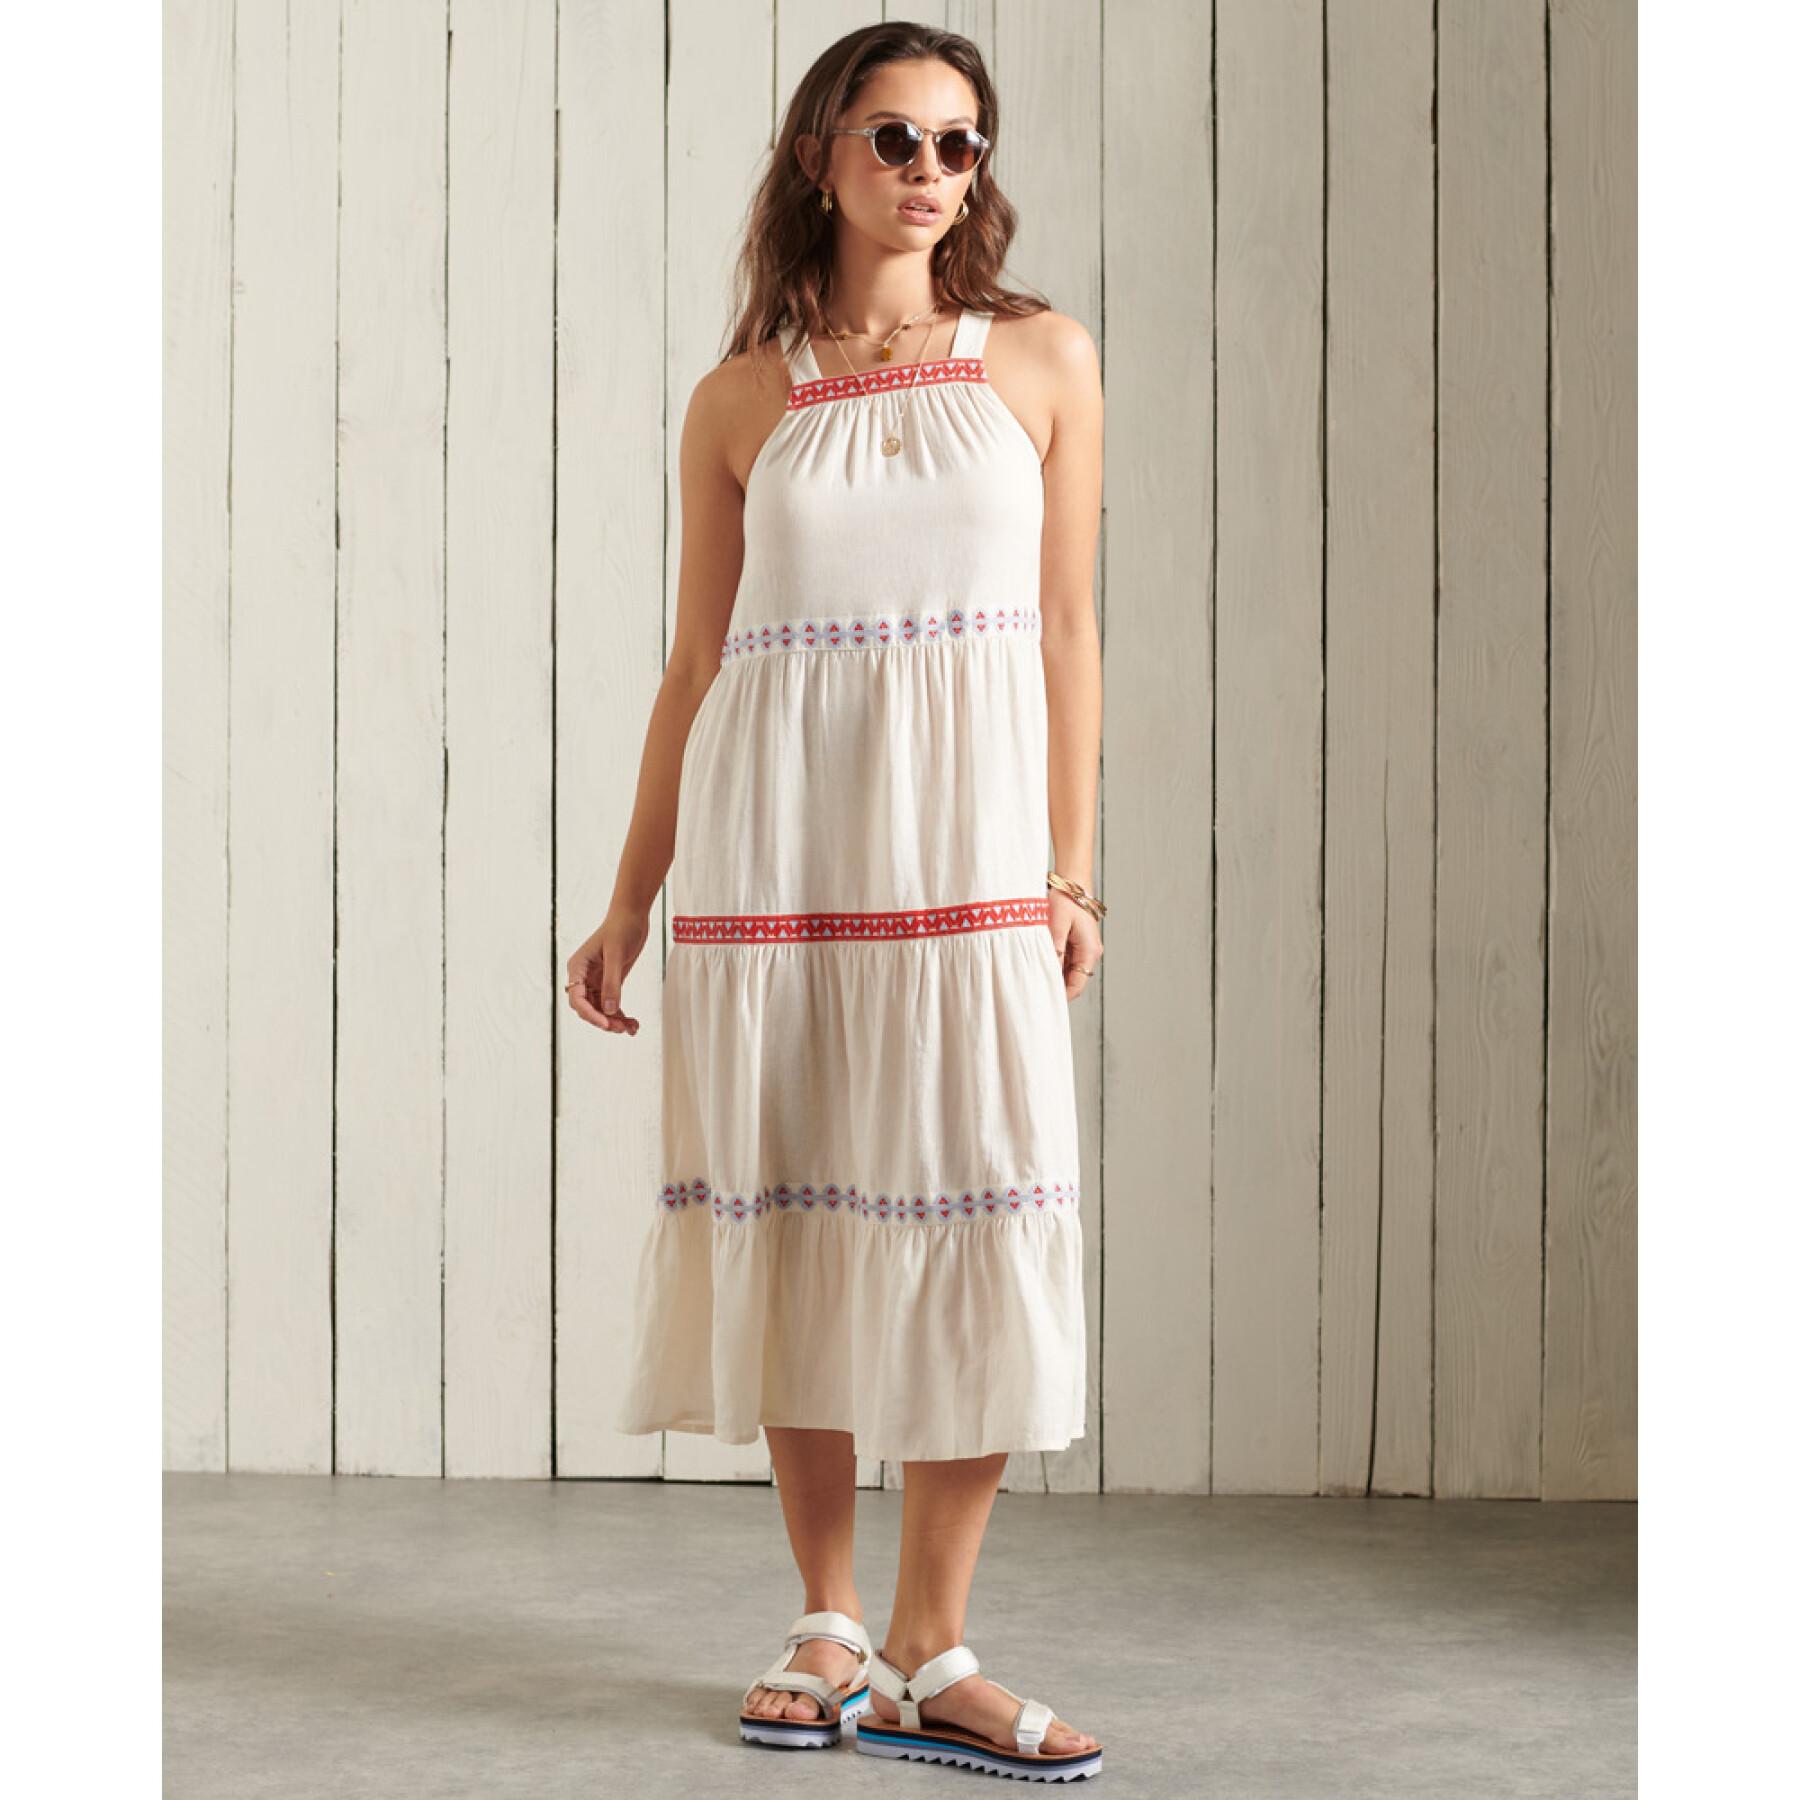 Women's sleeveless embroidered dress Superdry